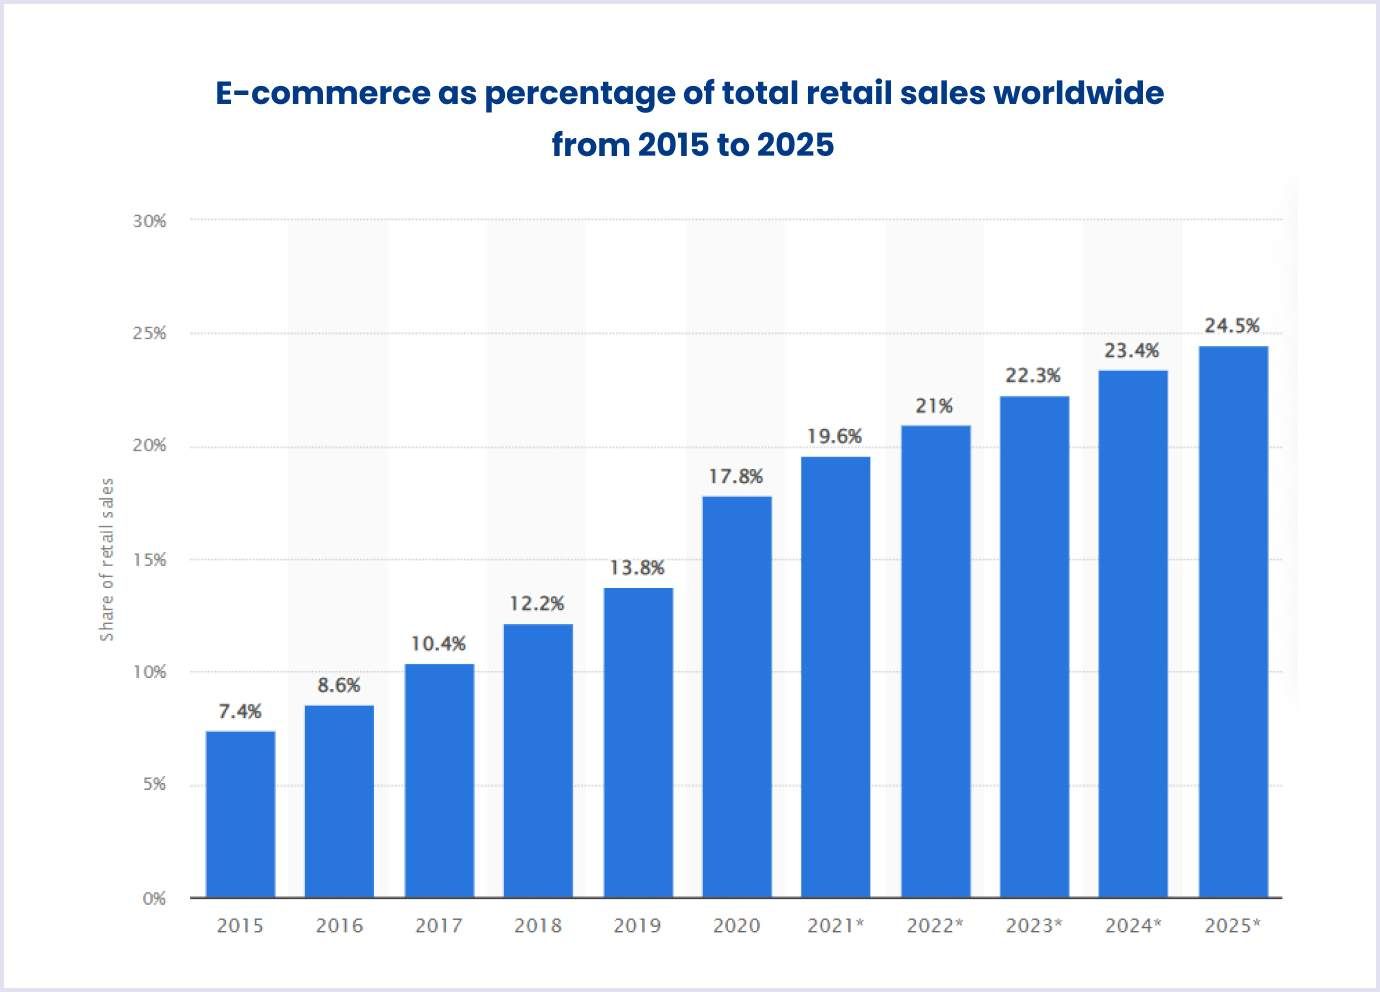 Worldwide e-commerce share of retail sales